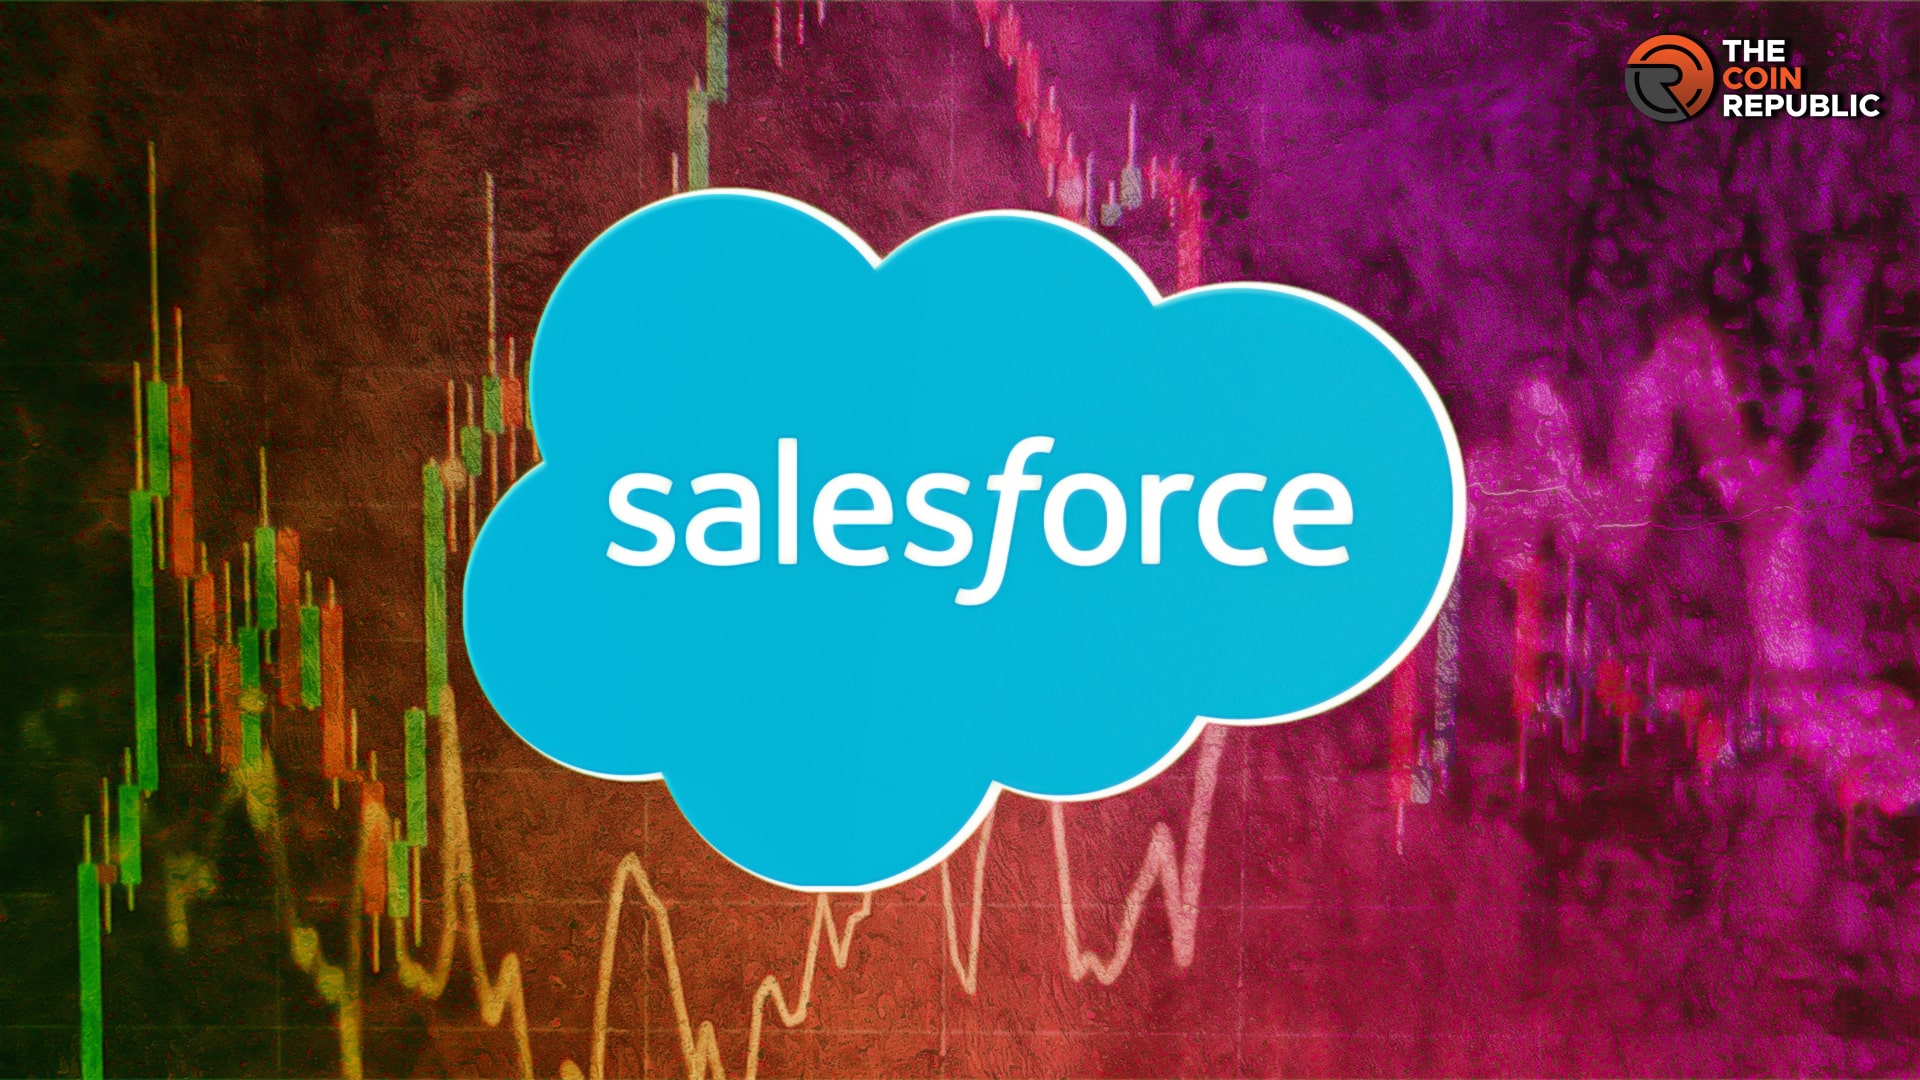 Salesforce Stock Forecast: Will (NYSE: CRM) Descend or Rebound?